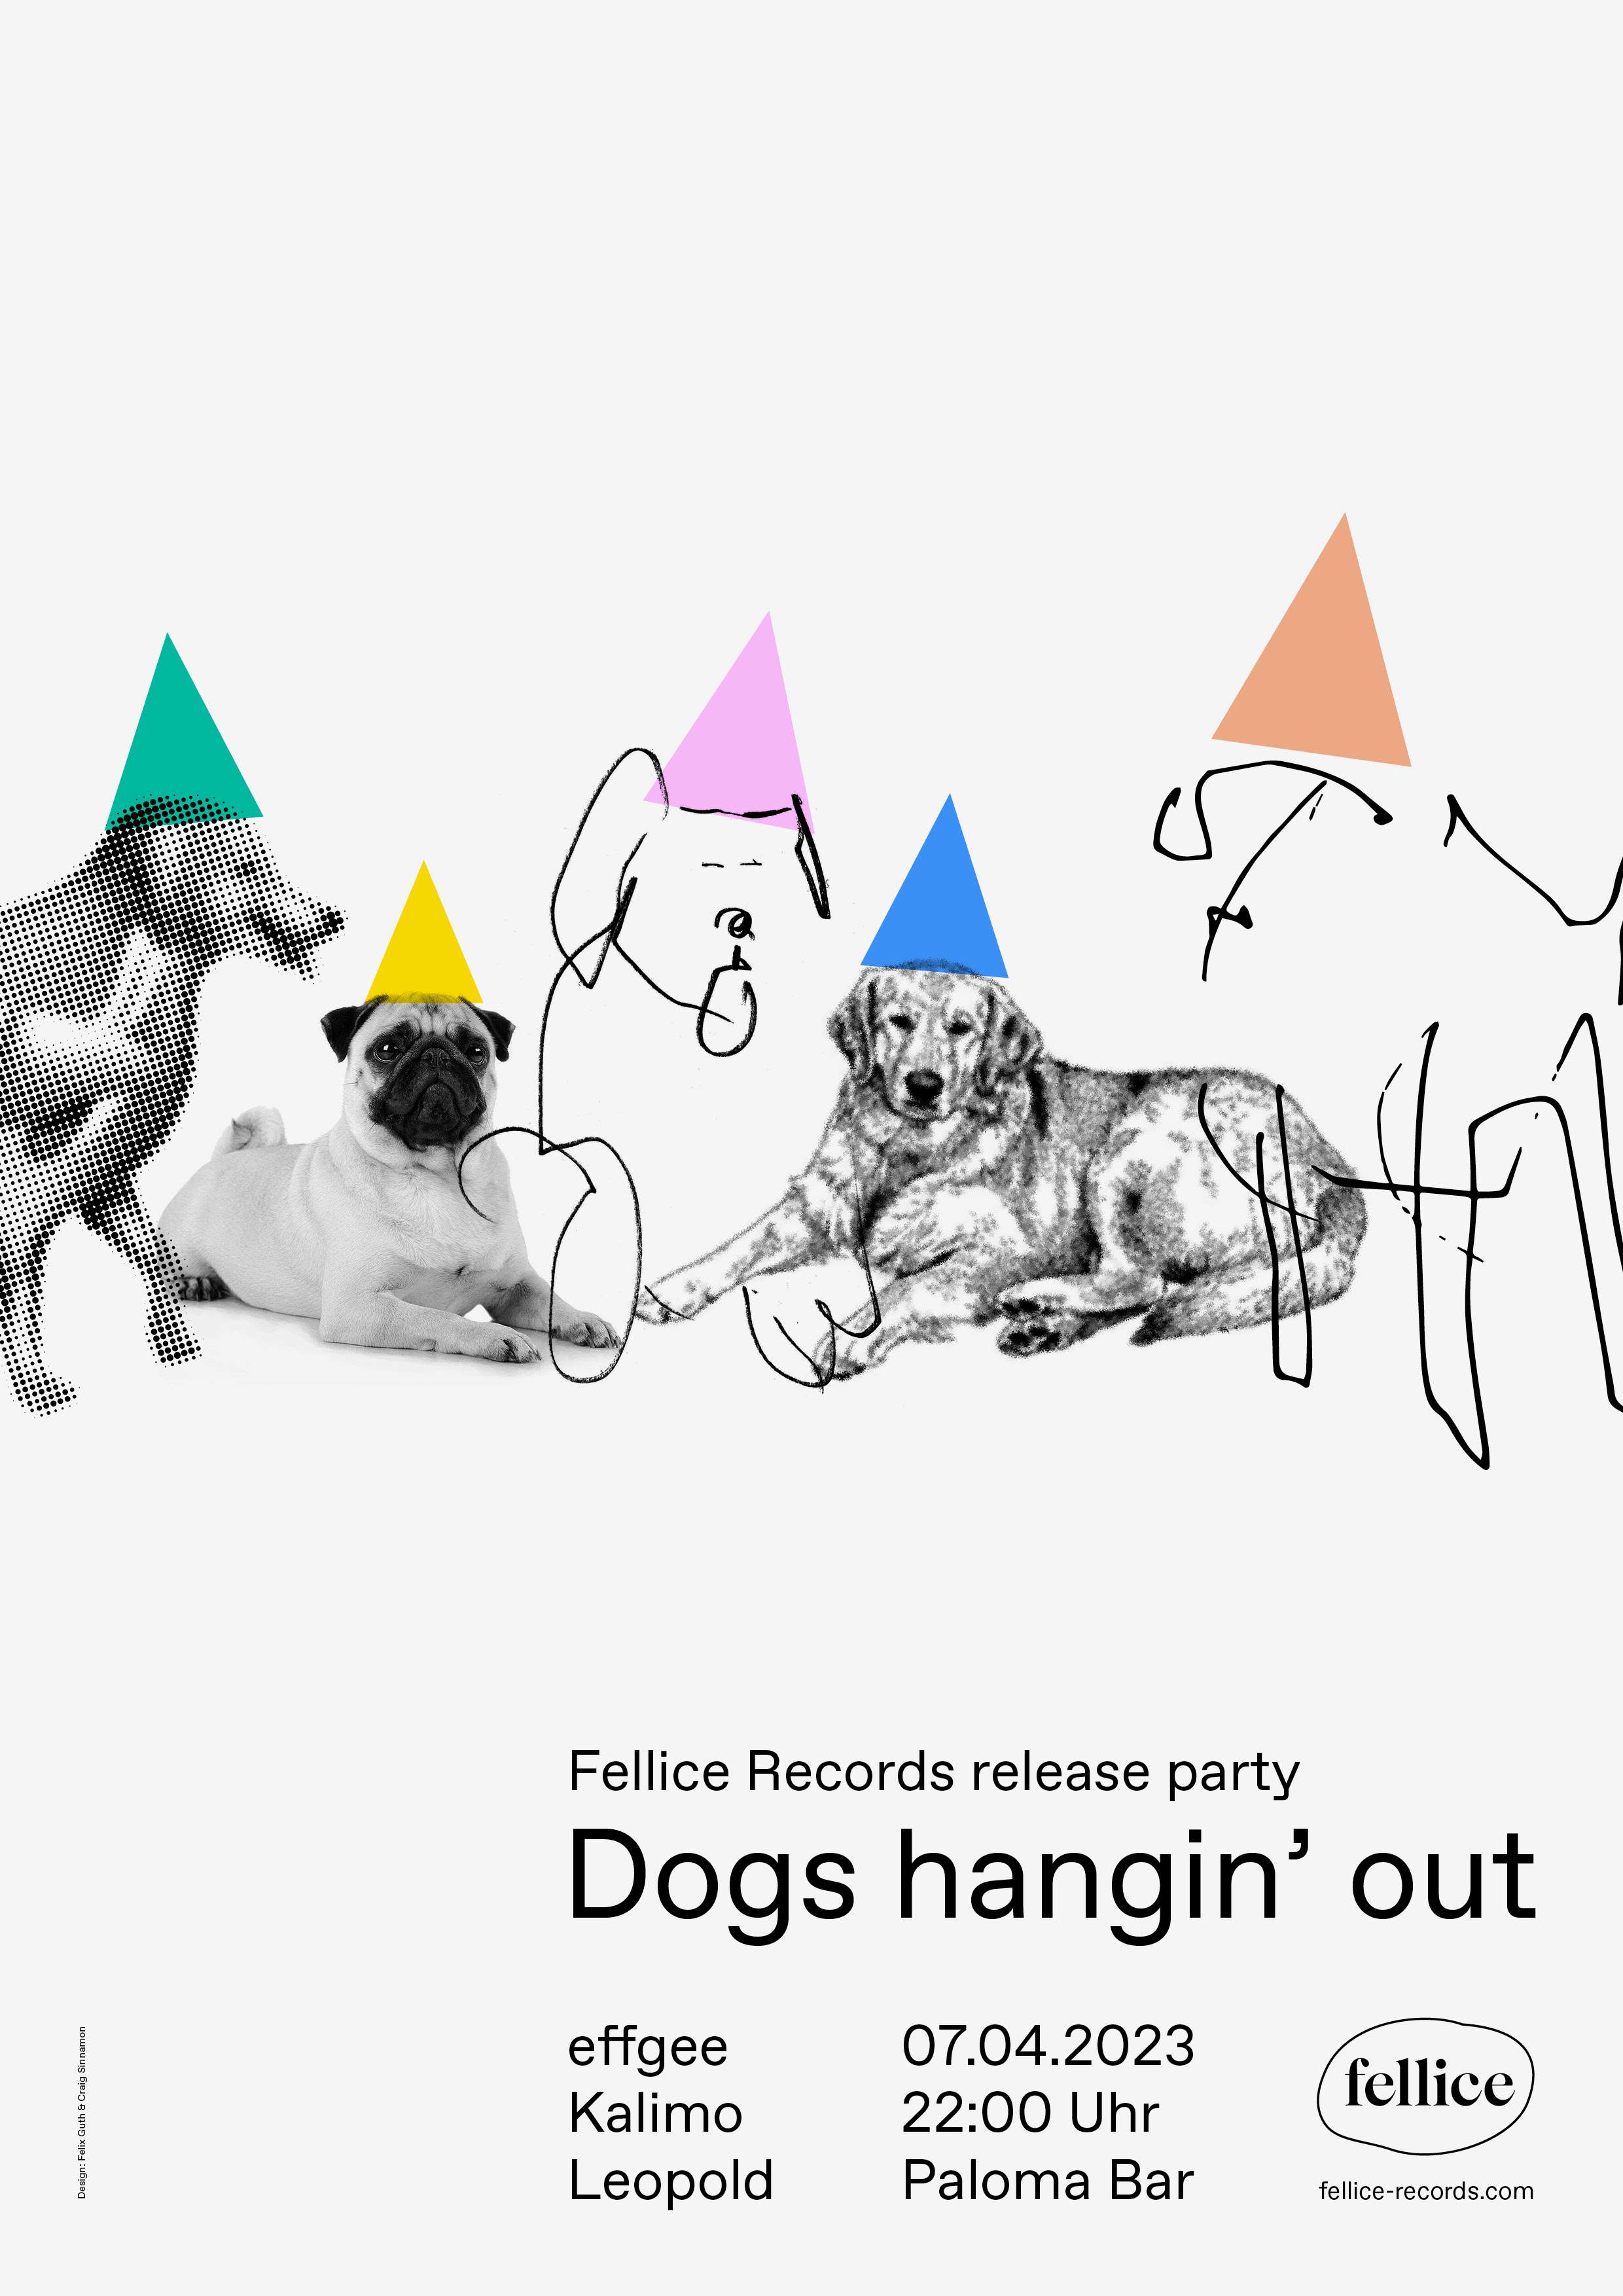 Dogs hangin' out – Fellice Records release party - Página frontal